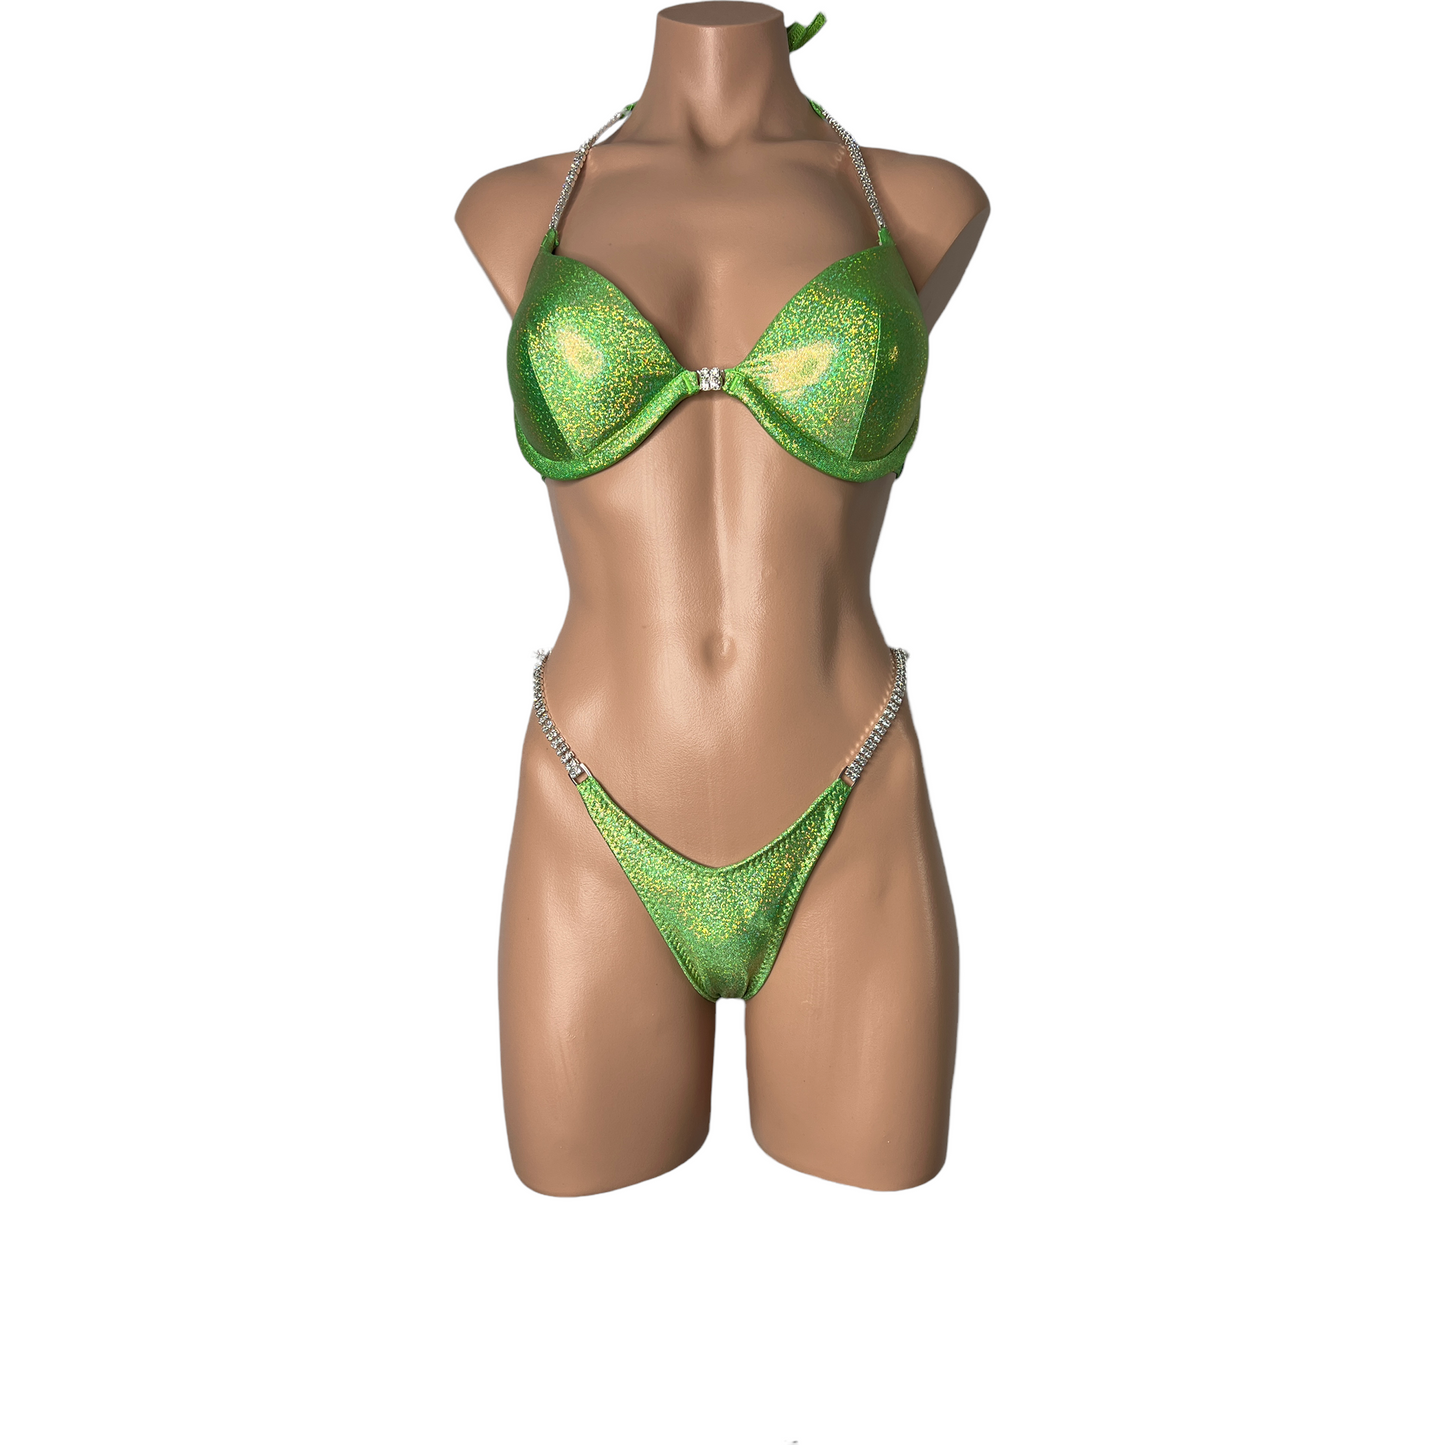 Wellness suit with push up bra